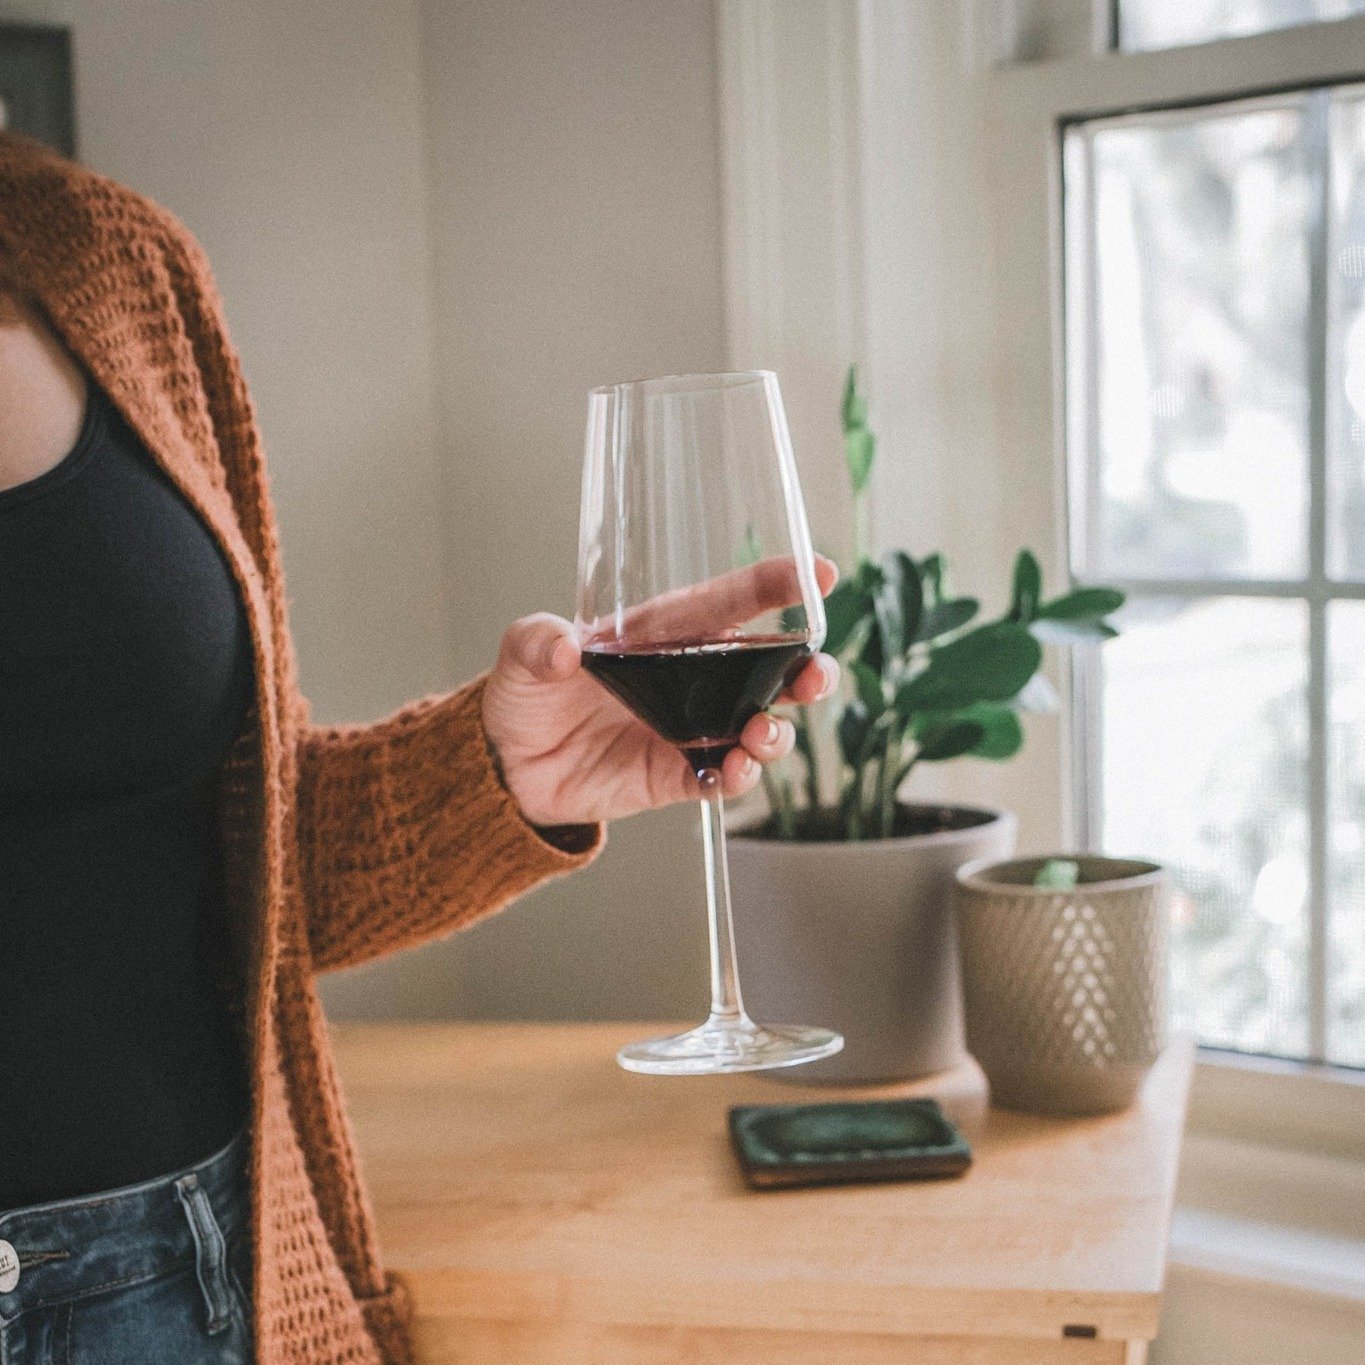 𝓜𝓸𝓽𝓱𝓮𝓻'𝓼 𝓓𝓪𝔂 𝓲𝓼 𝓜𝓪𝔂 𝟏𝟐!

Give mom Claudine Wines this Mother's Day and become the instant favorite in the family!

🍷Link in bio to shop🍷
📸: @ohsnapphotoswhitney 
.
.
.
 #MothersDay #MothersDayGiftIdeas #mothersday #mothersdaygift 